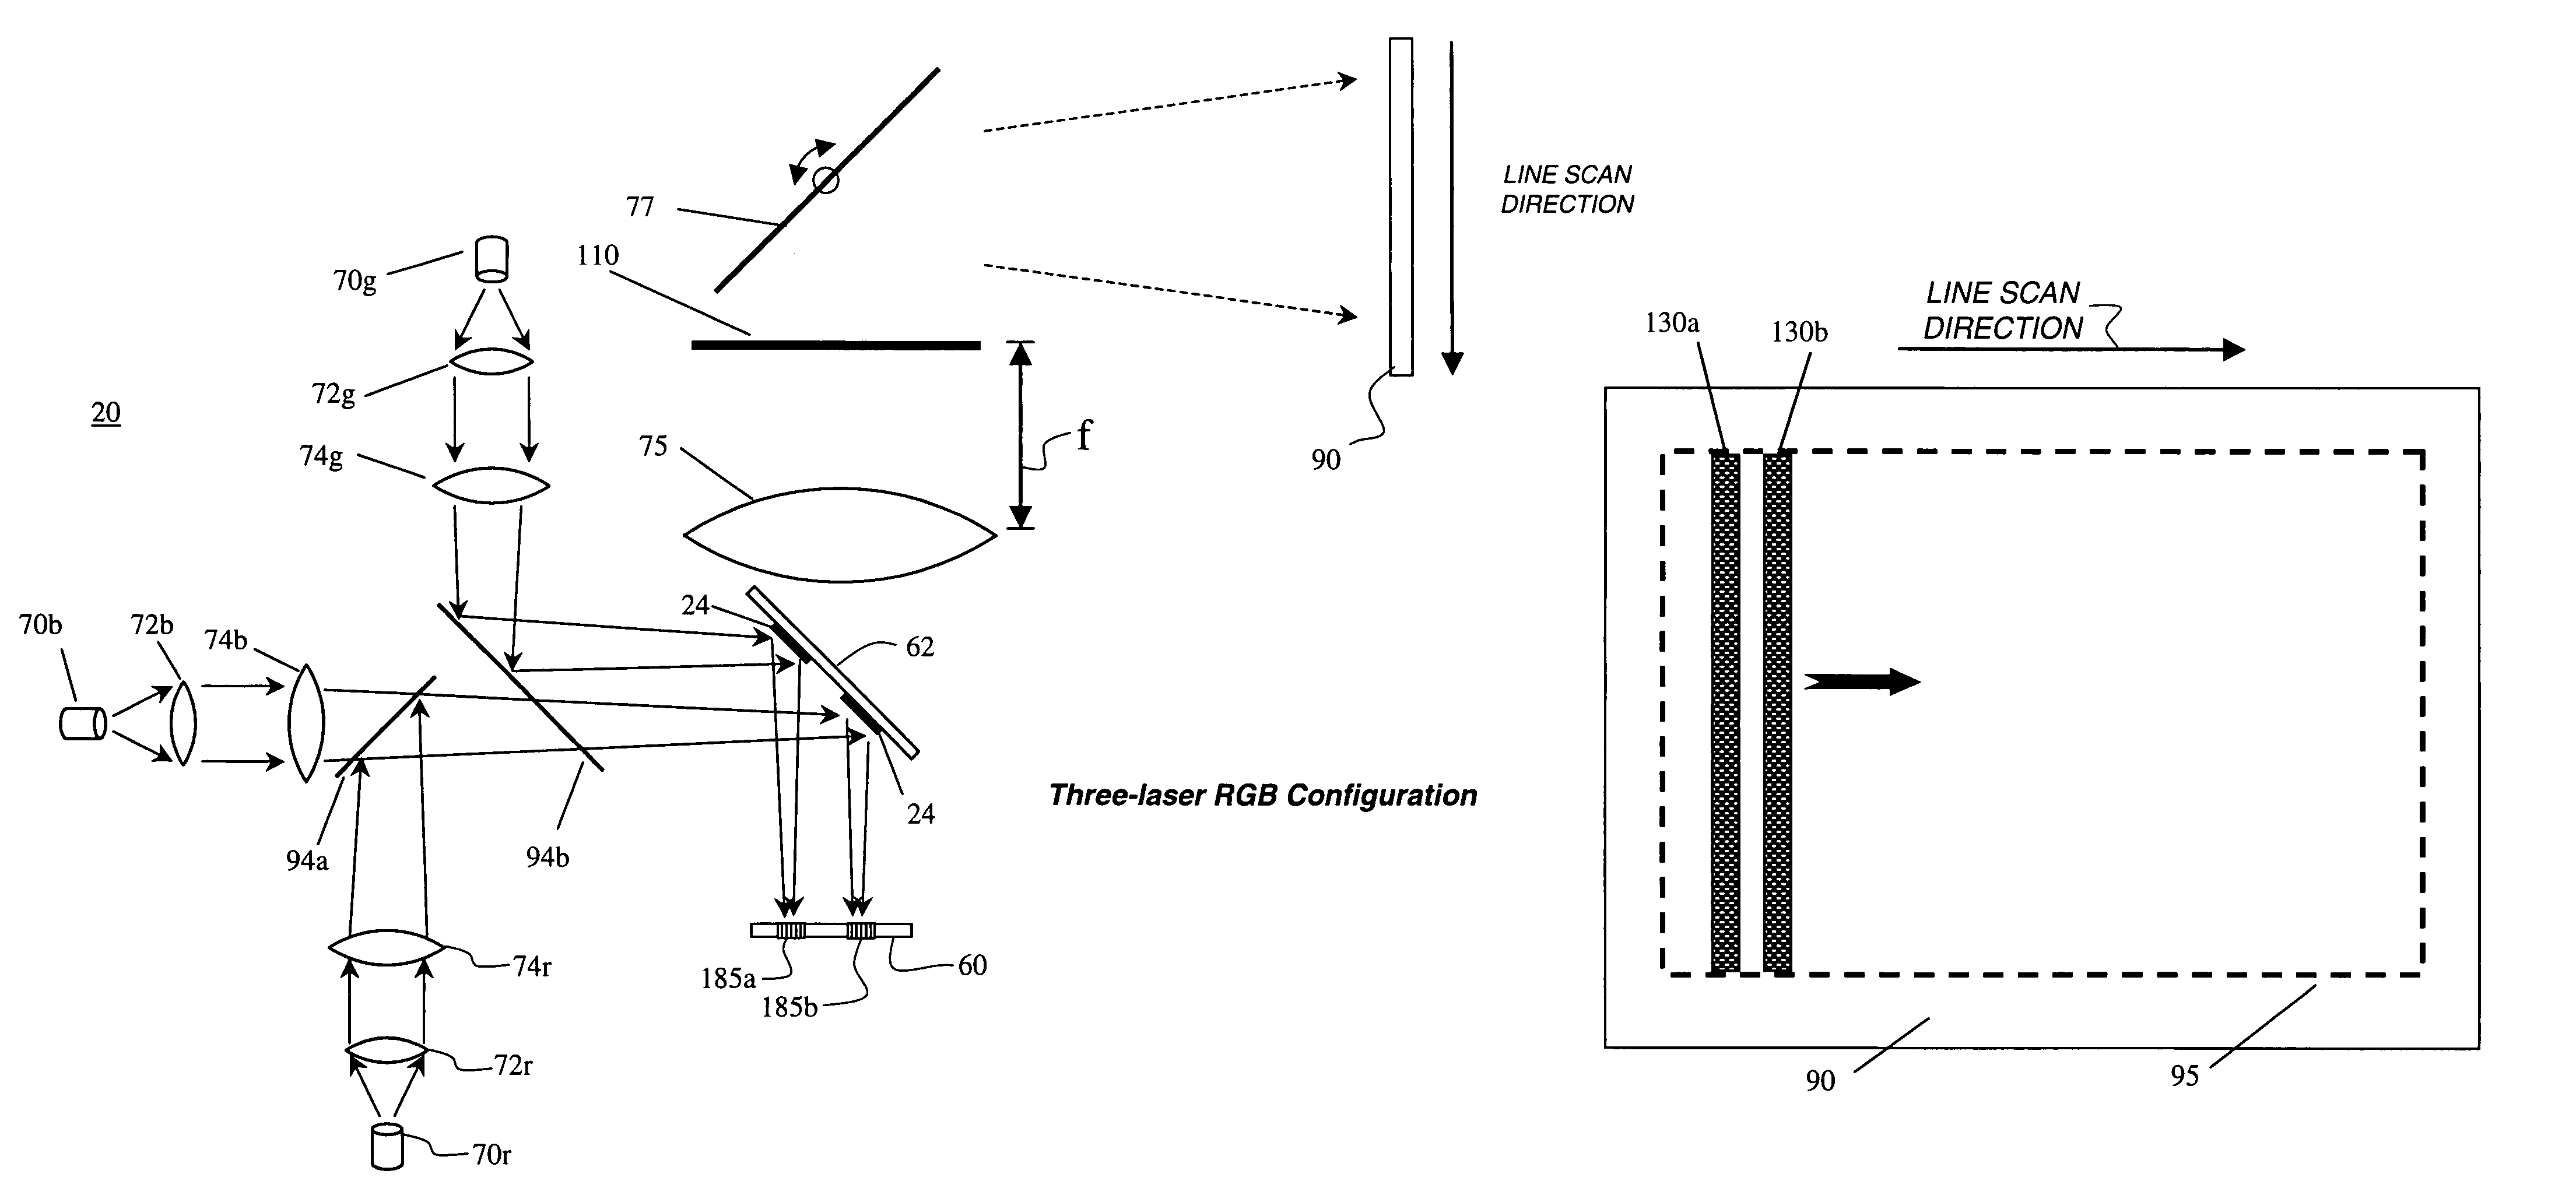 Display system incorporating bilinear electromechanical grating device